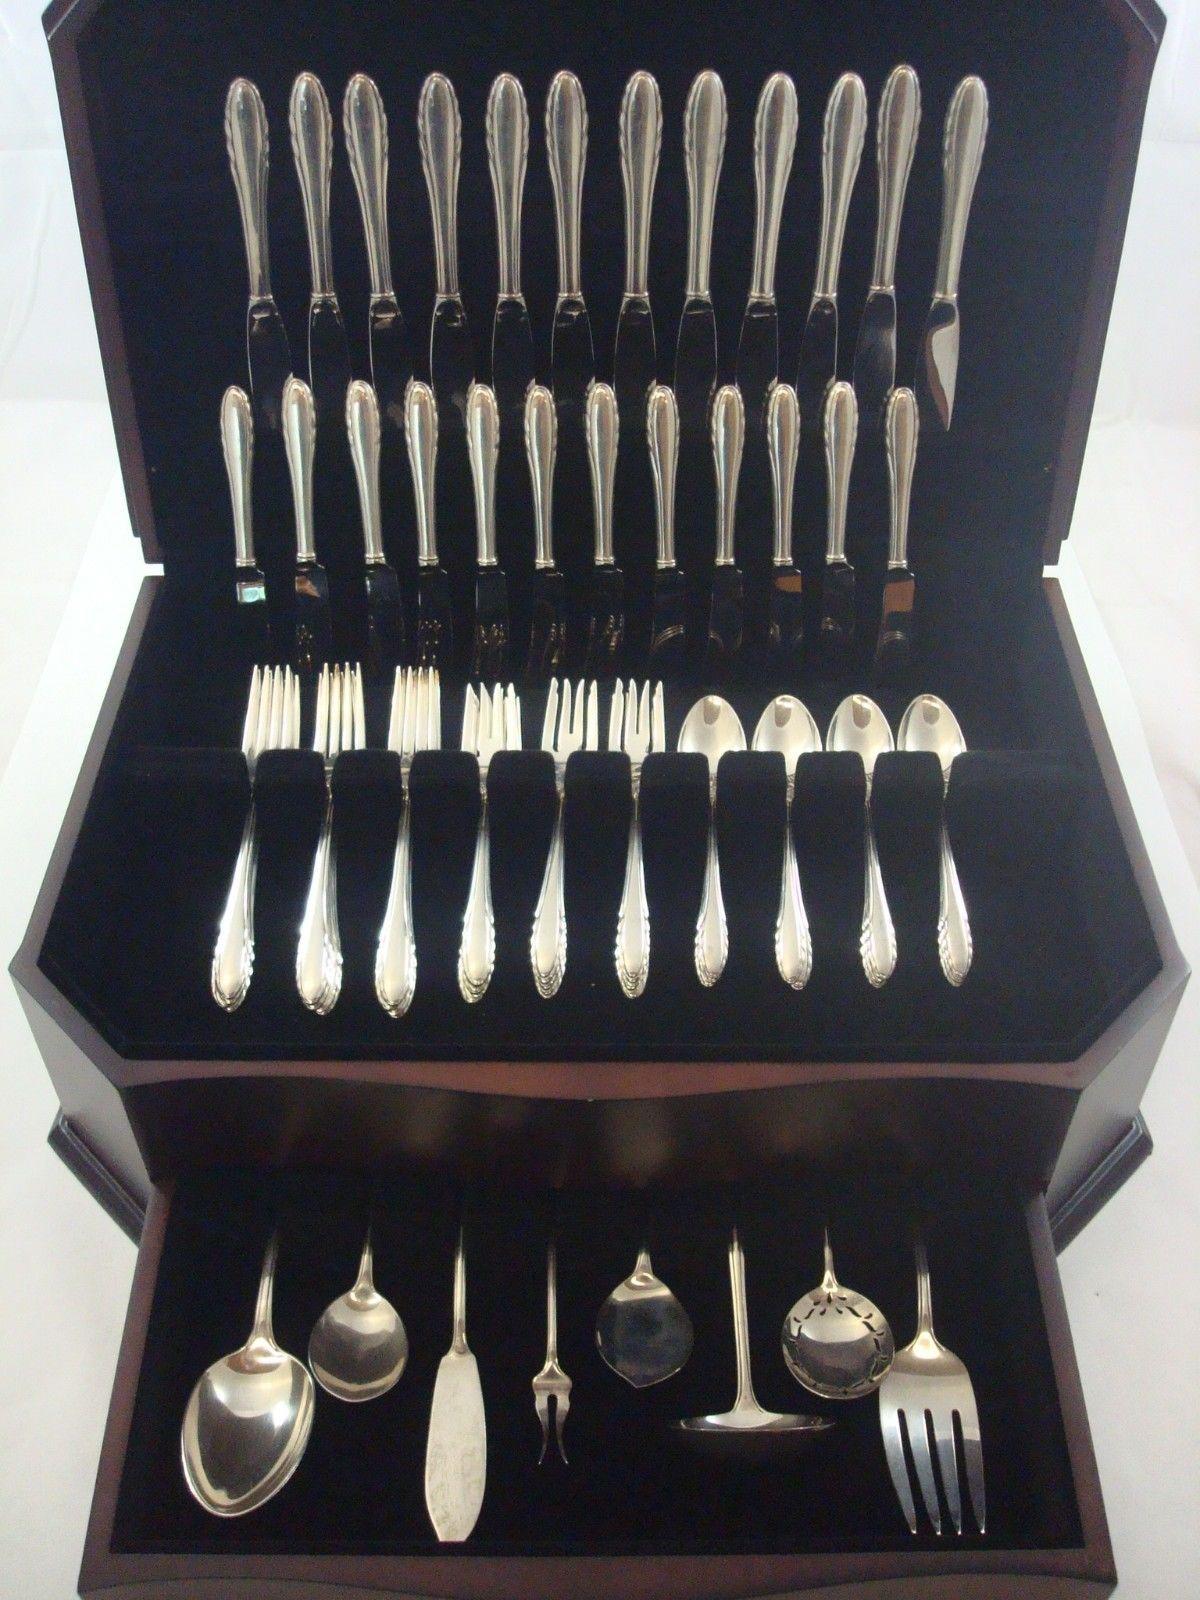 Heirloom quality Lyric by Gorham sterling silver flatware set of 69 pieces. This set includes:

12 knives, 8 7/8